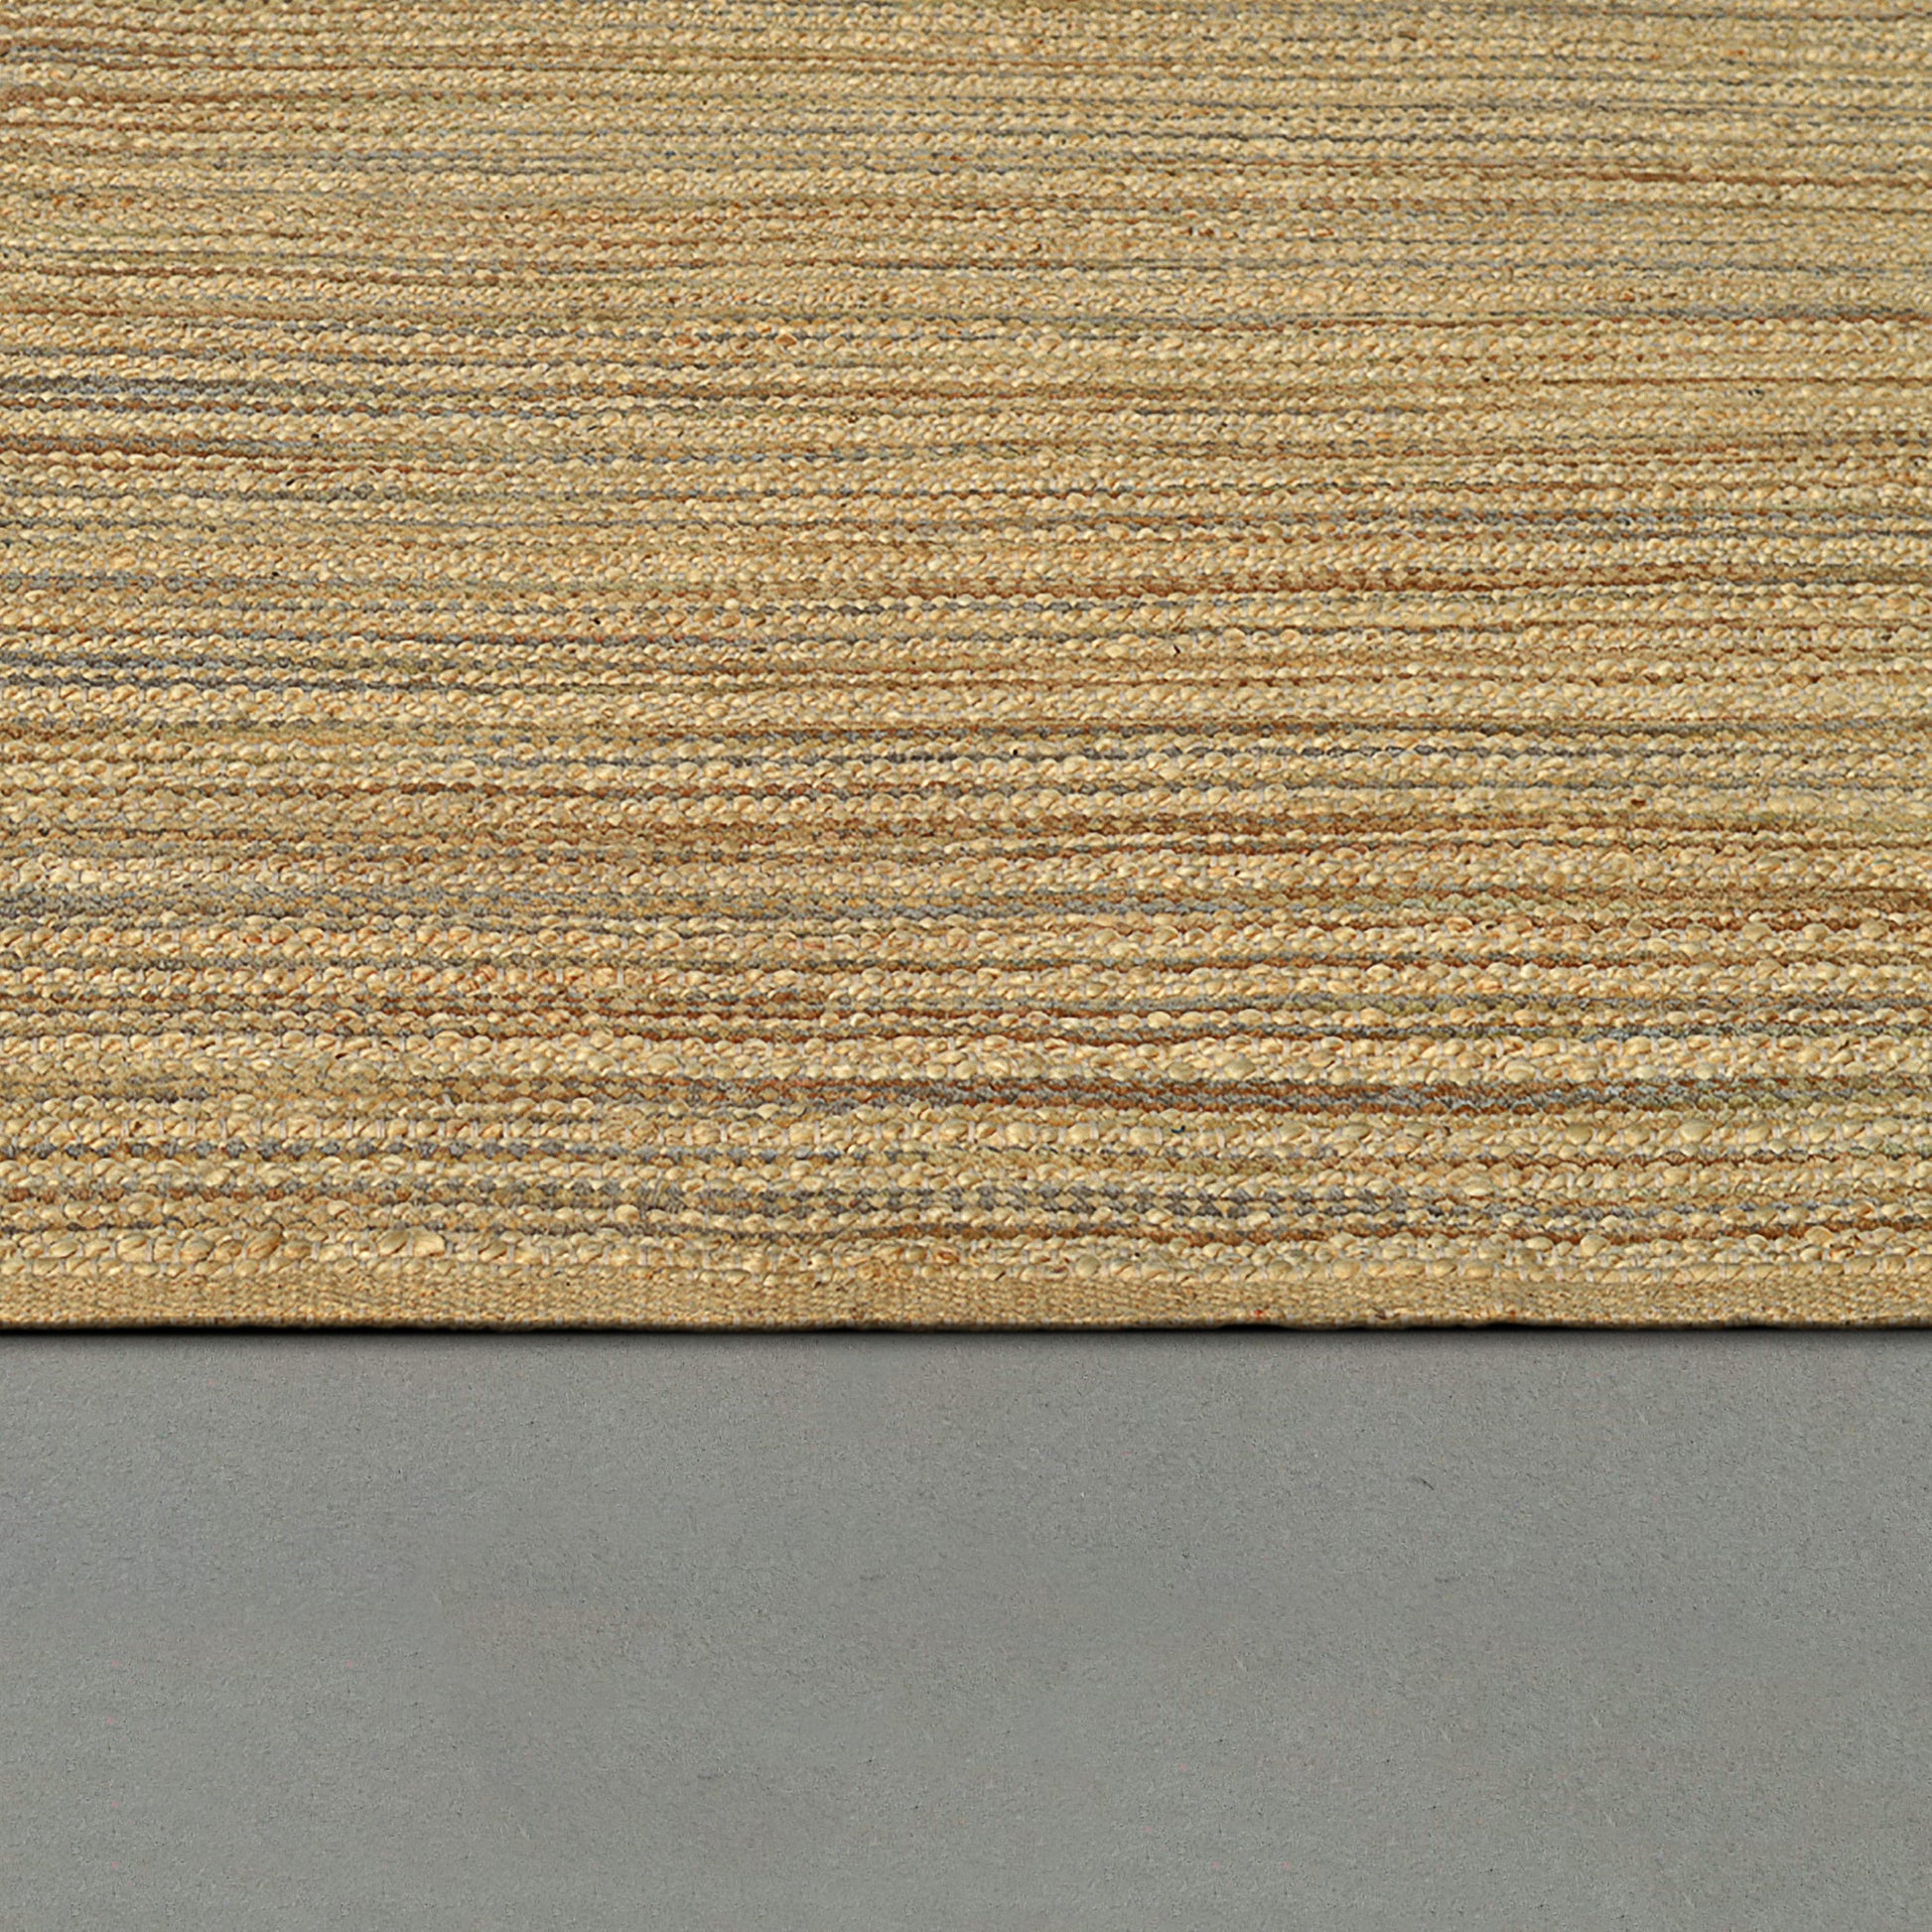 Dynamic Rugs Shay 9425 Natural/Taupe Area Rug